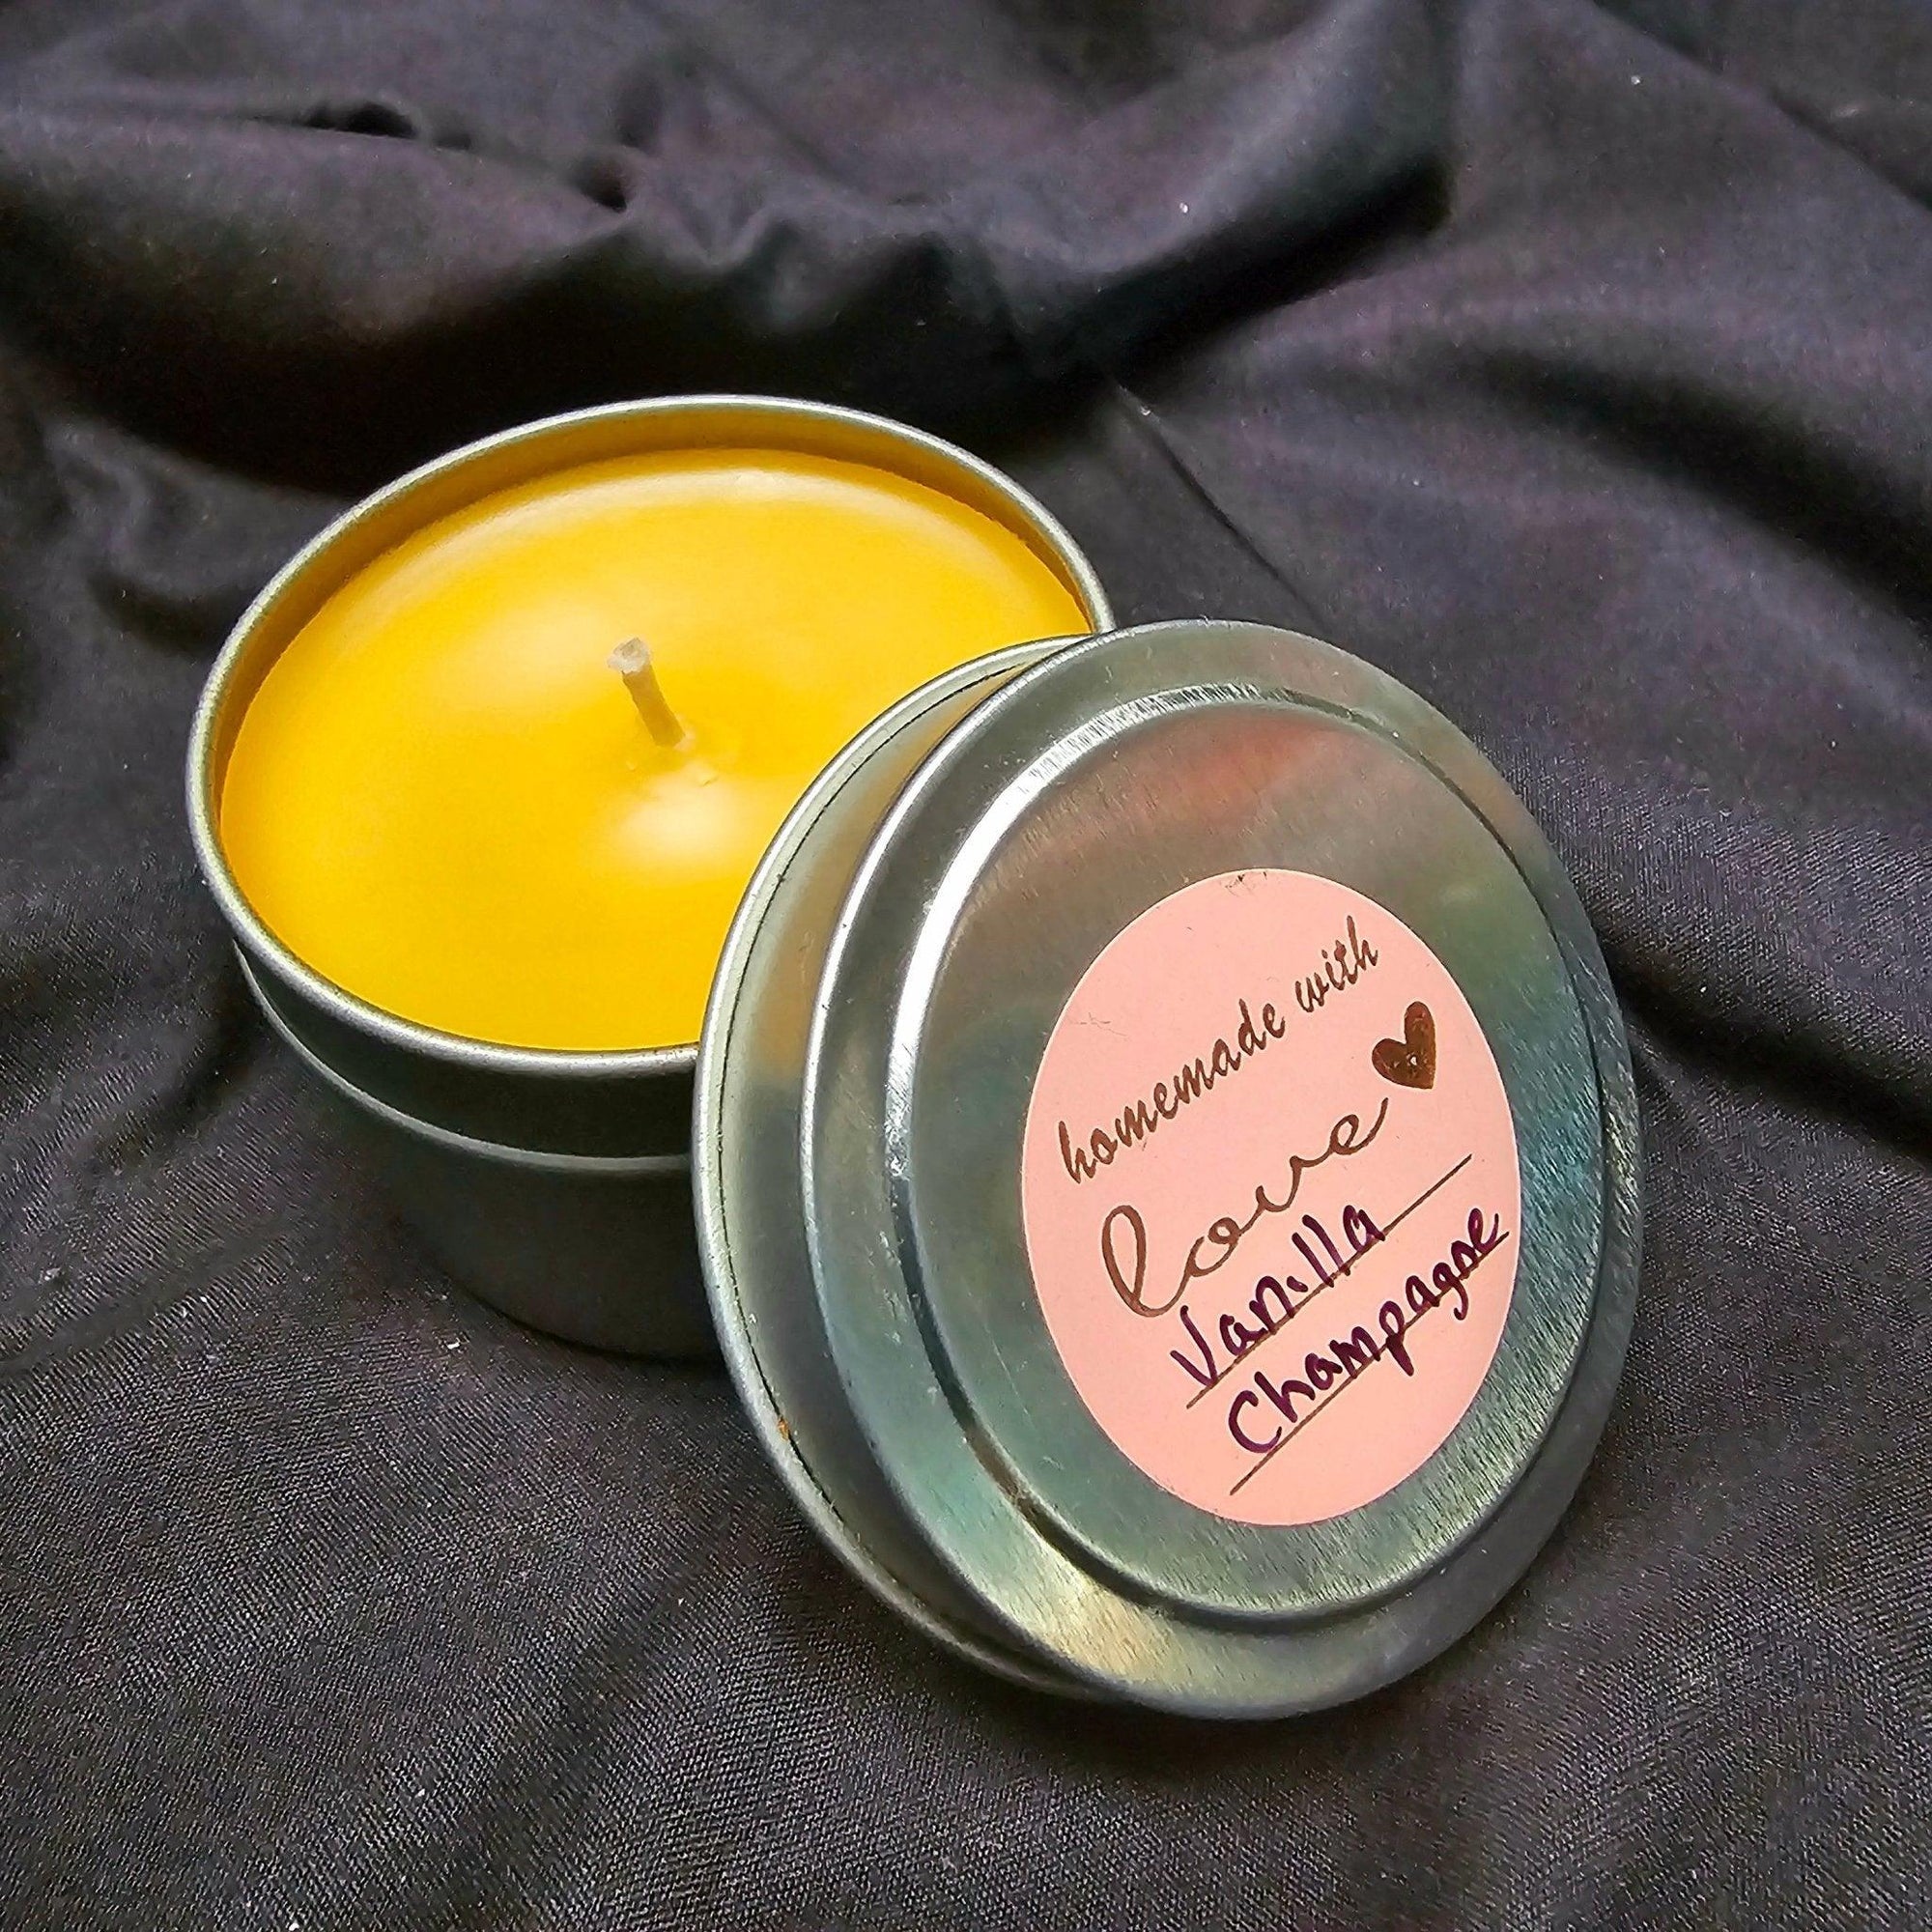 8oz. Candle Tin - Vanilla Champagne Scented Candle Tin Flamingwick Candles & Wax Melts   